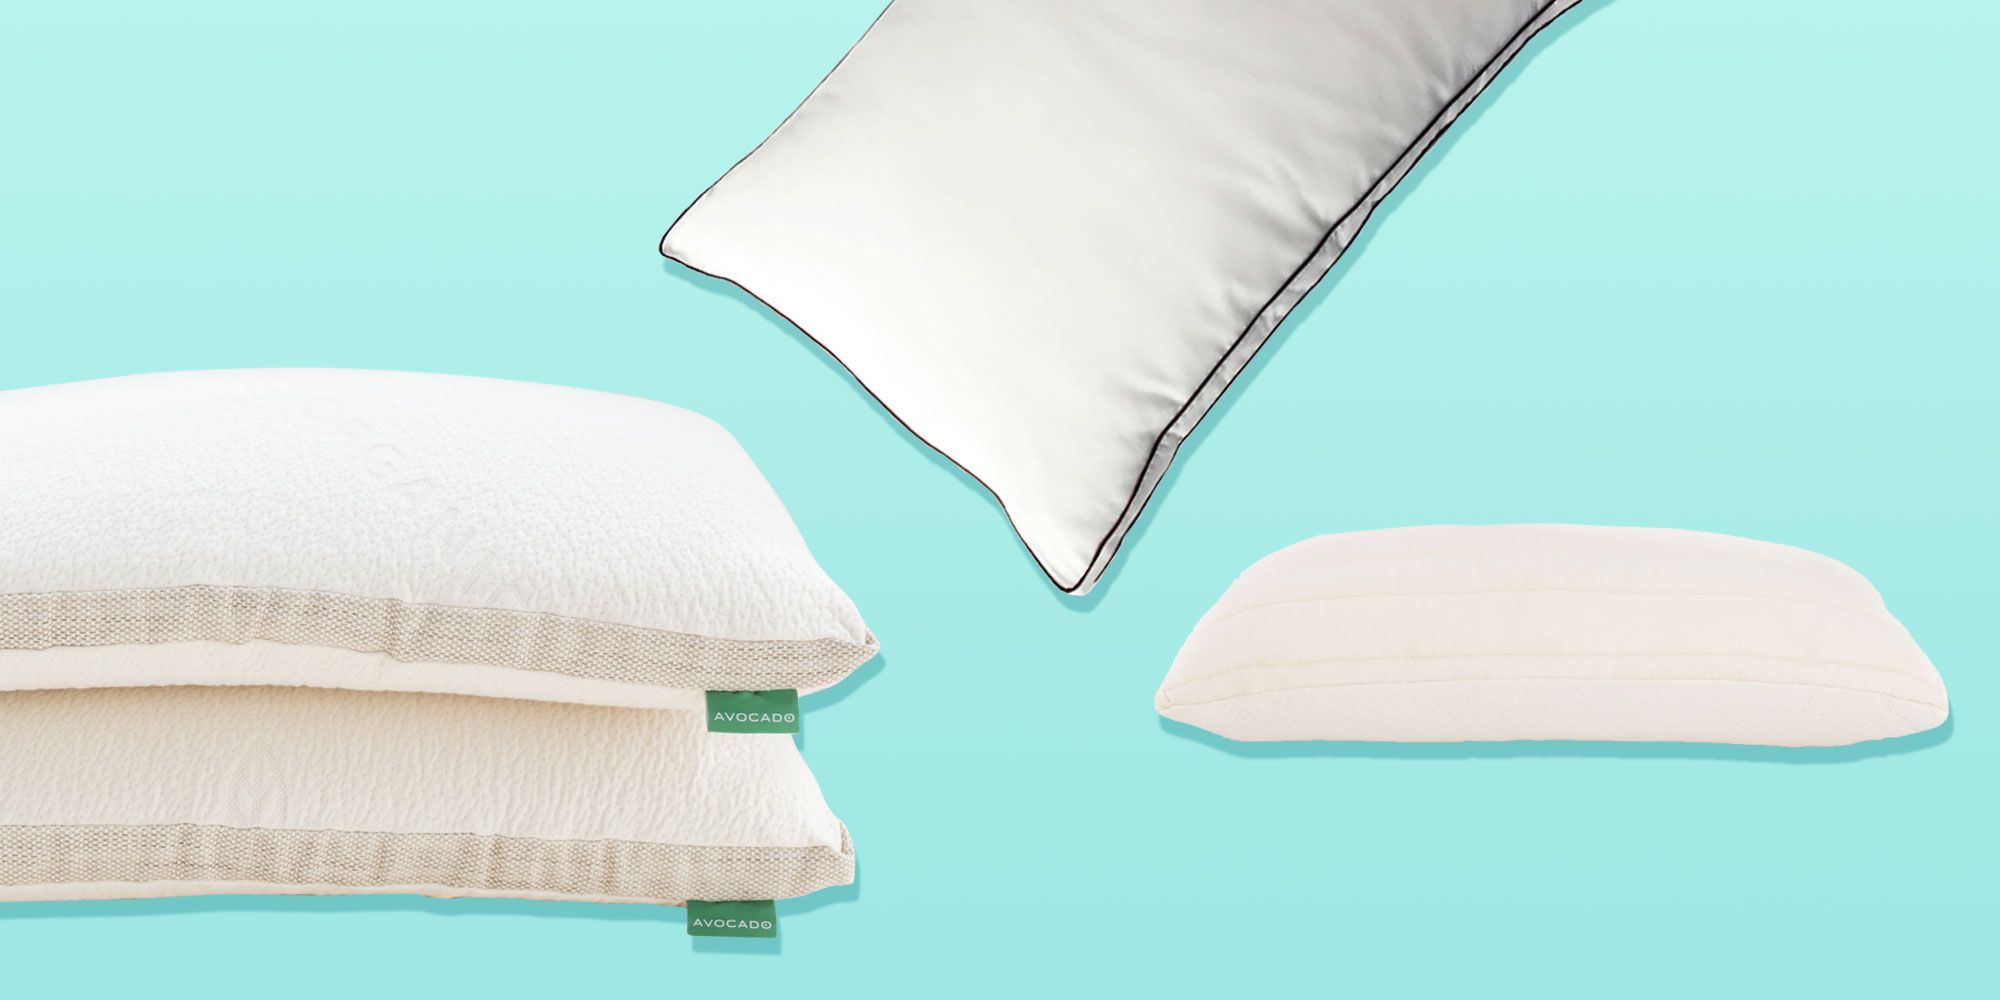 best organic pillow for side sleepers